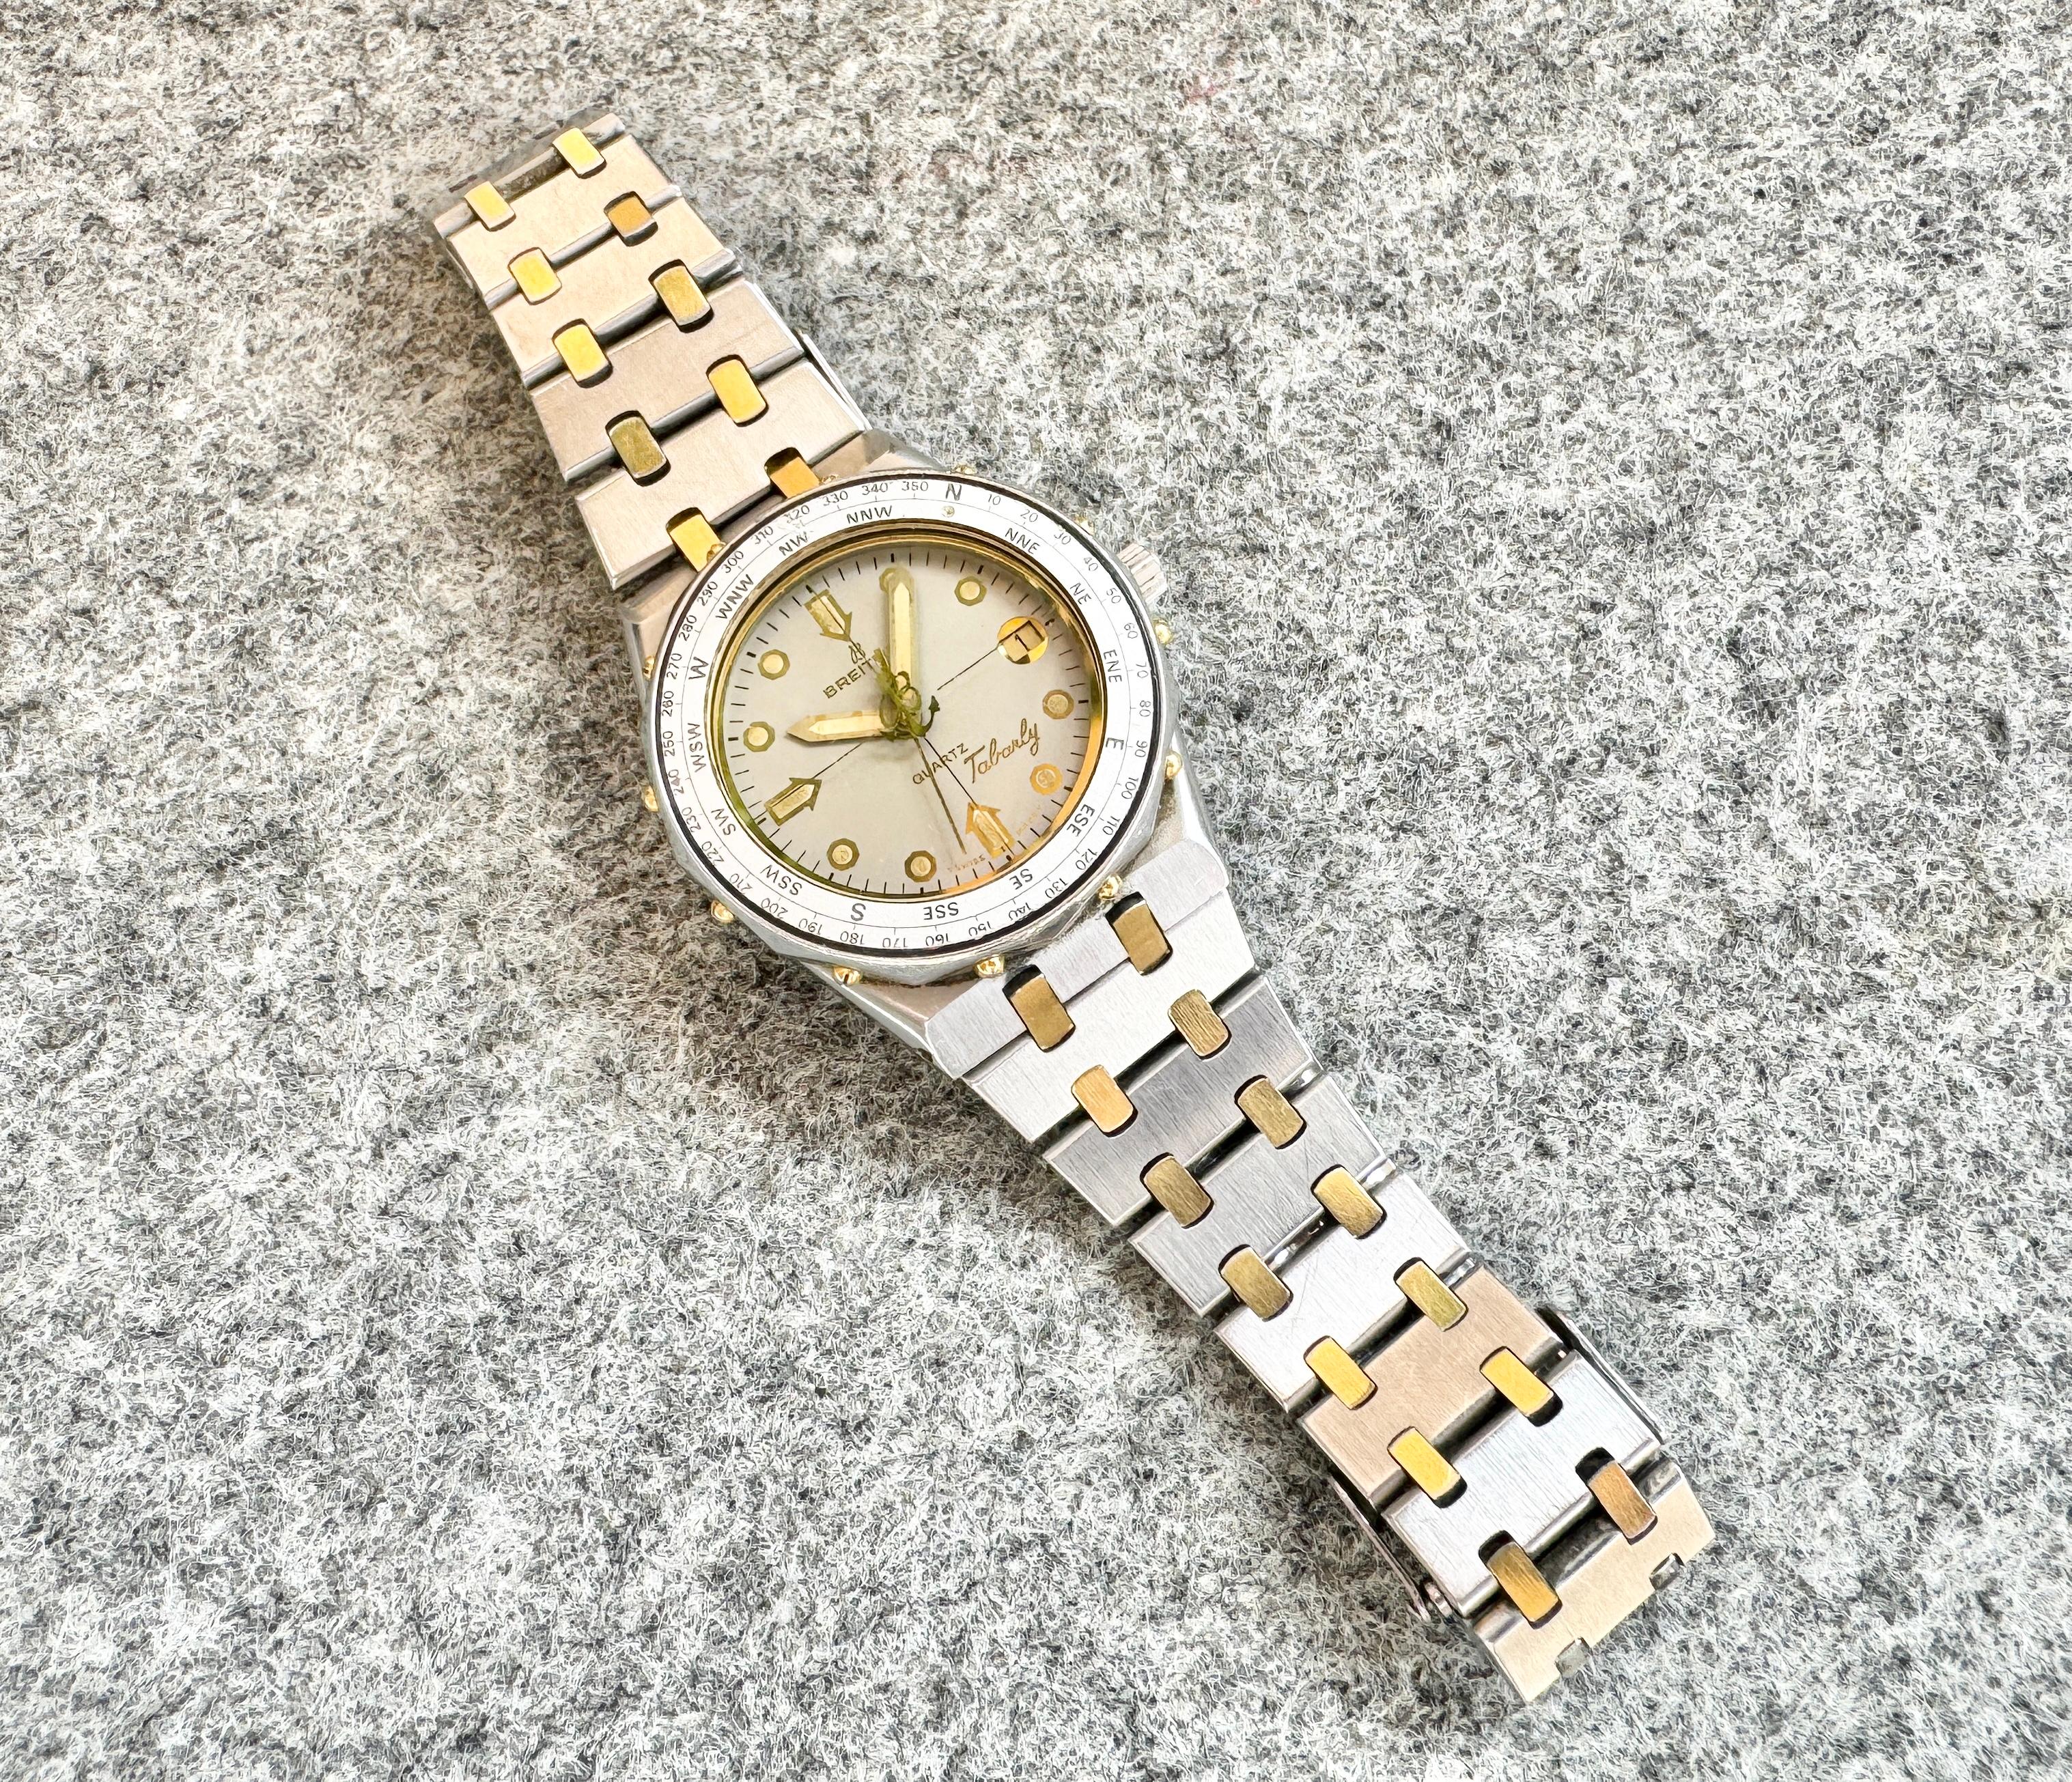 Brand: Breitling

Model: Tabarly

Reference Number: 80770N

Country Of Manufacture: Switzerland

Movement: Quartz

Case Material: Stainless steel/ Gold

Measurements : Case width: 35 mm. (without crown)

Band Type : Stainless steel/ Gold